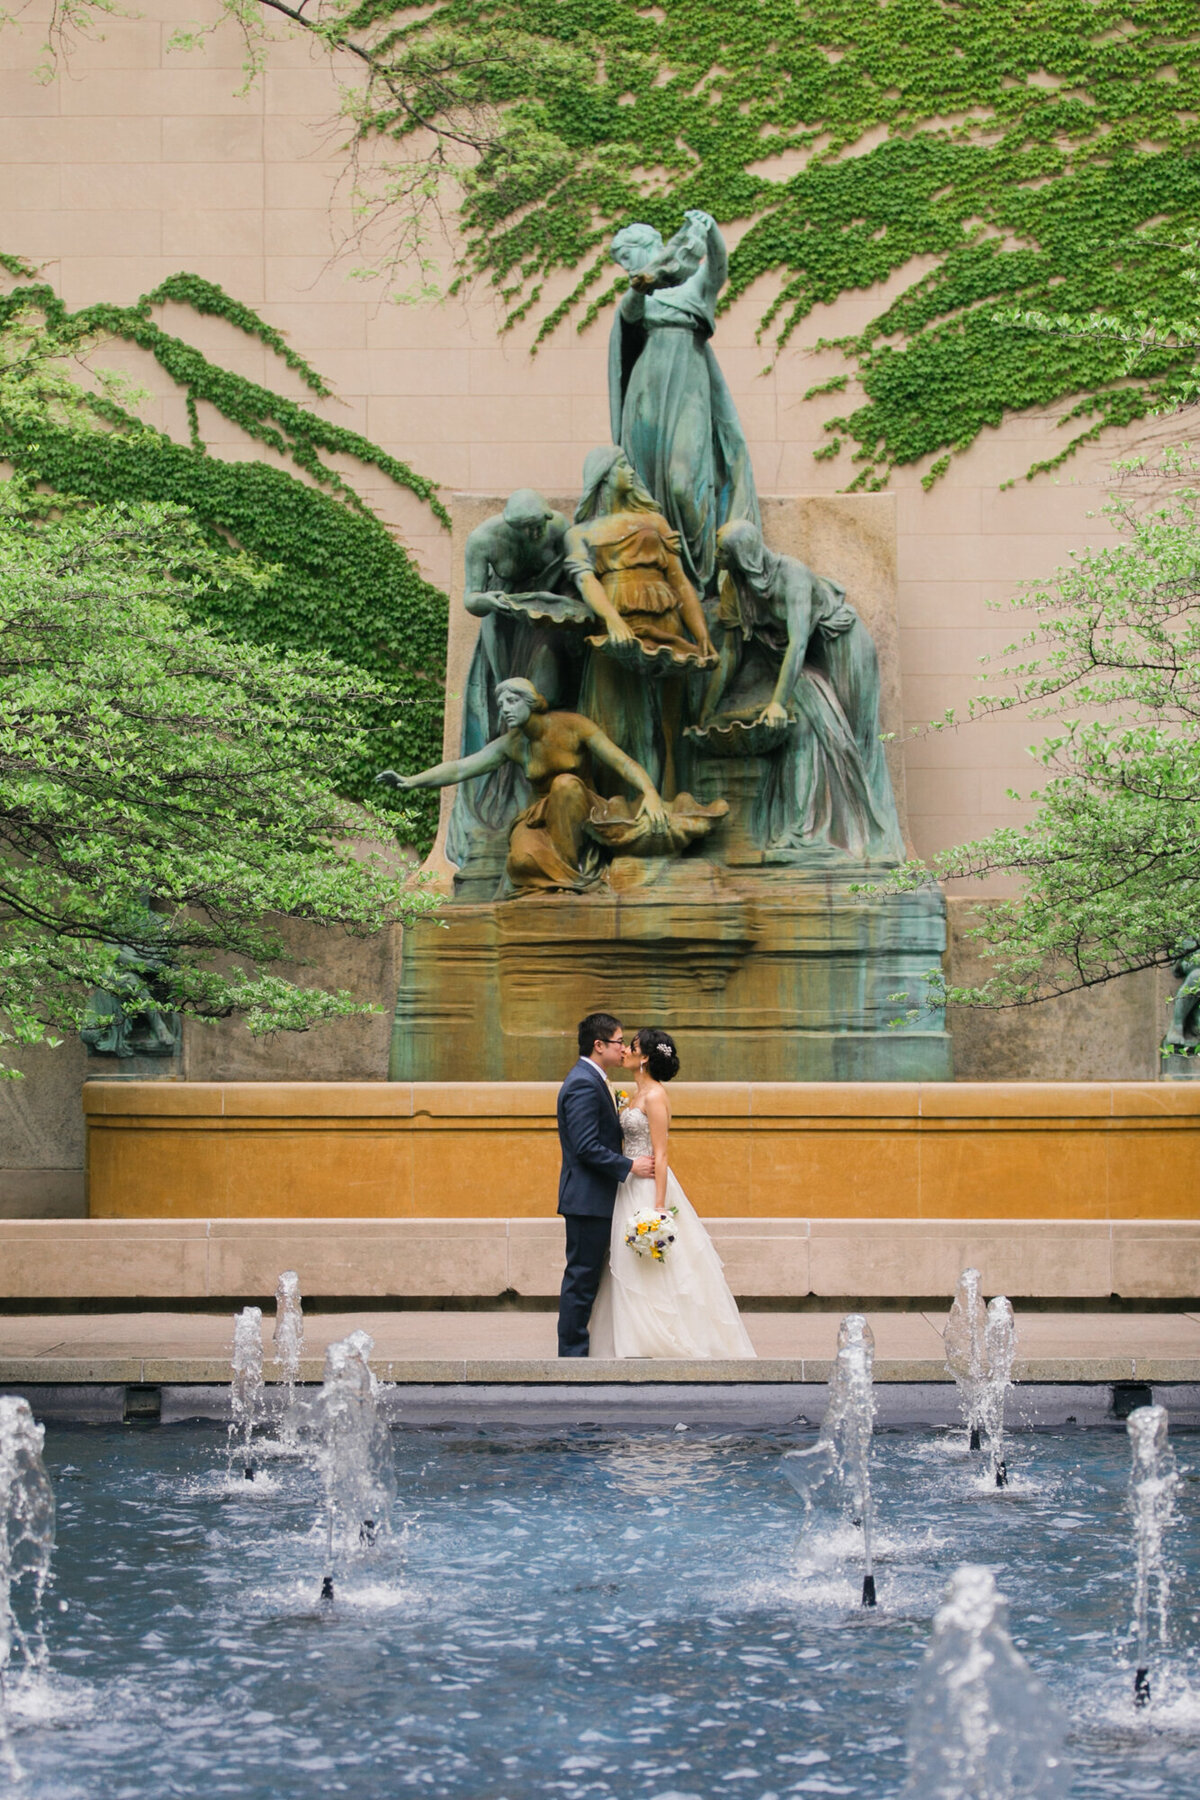 A wedding portrait taken in the South Garden of the Art Institute of Chicago